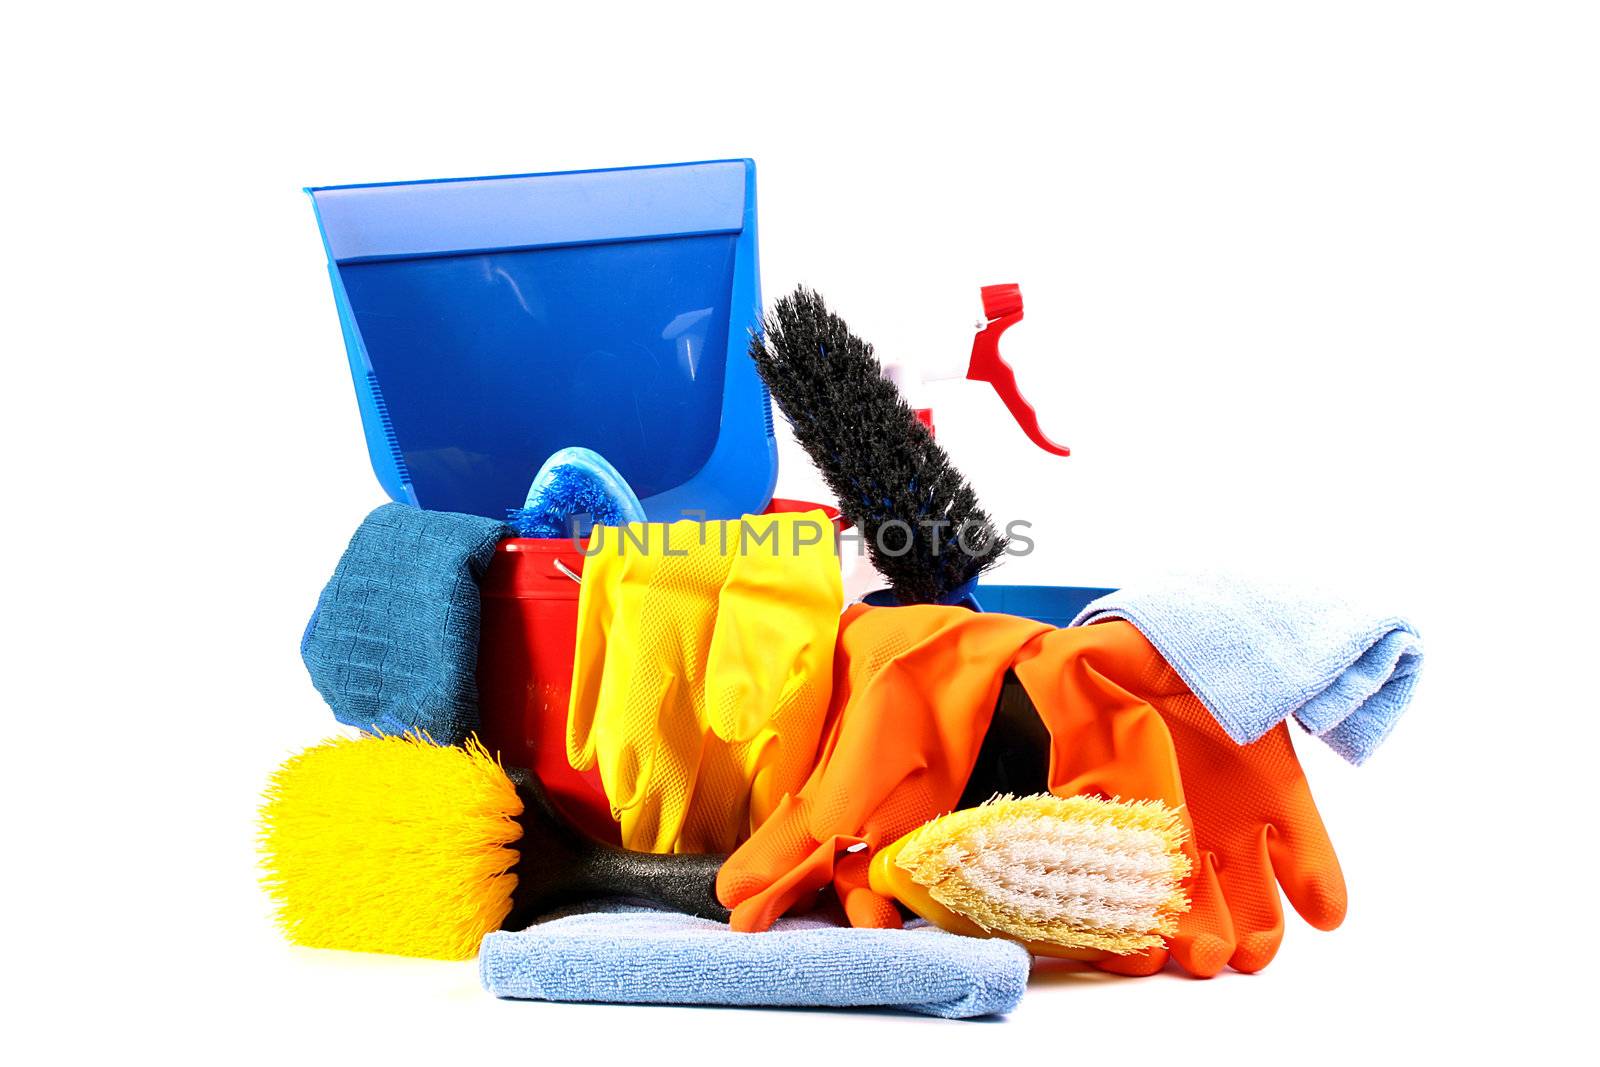 Brushes, a bucket, a spray of water and a rag for cleaning service.